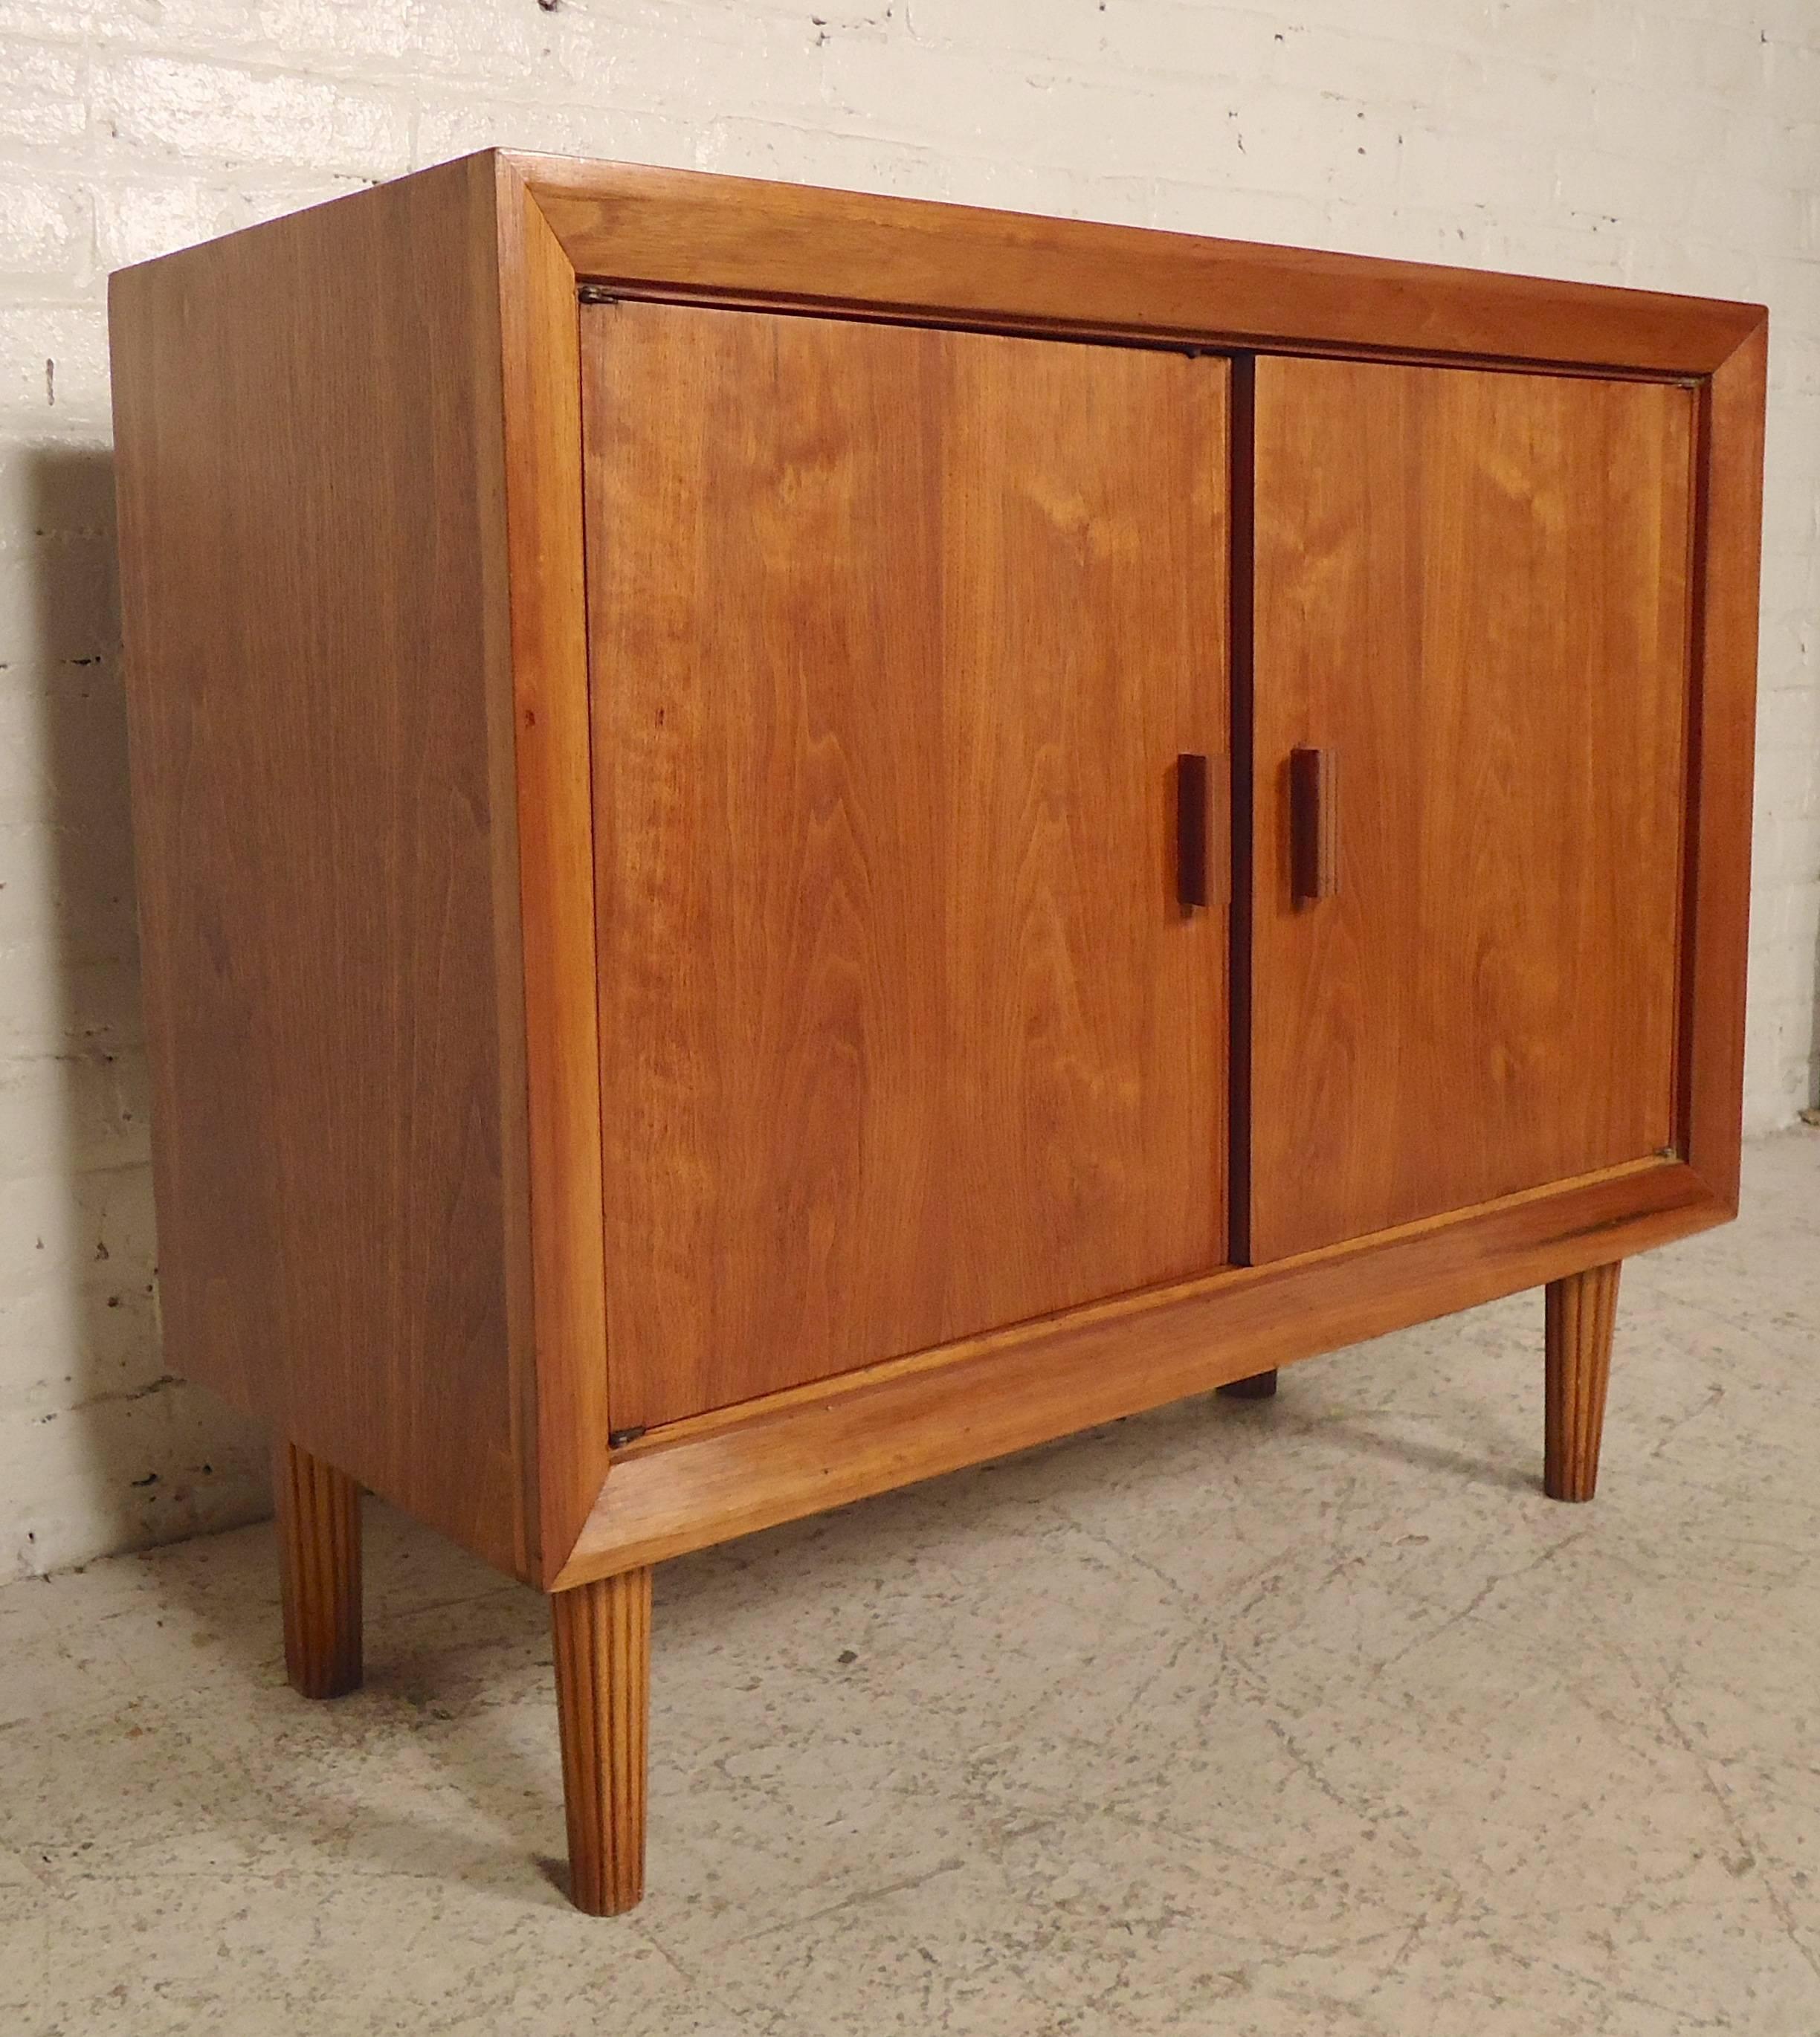 American vintage modern cabinet with two doors and open space with shelf. Nicely formed handles and legs and warm walnut grain.

(Please confirm item location - NY or NJ - with dealer.)
  